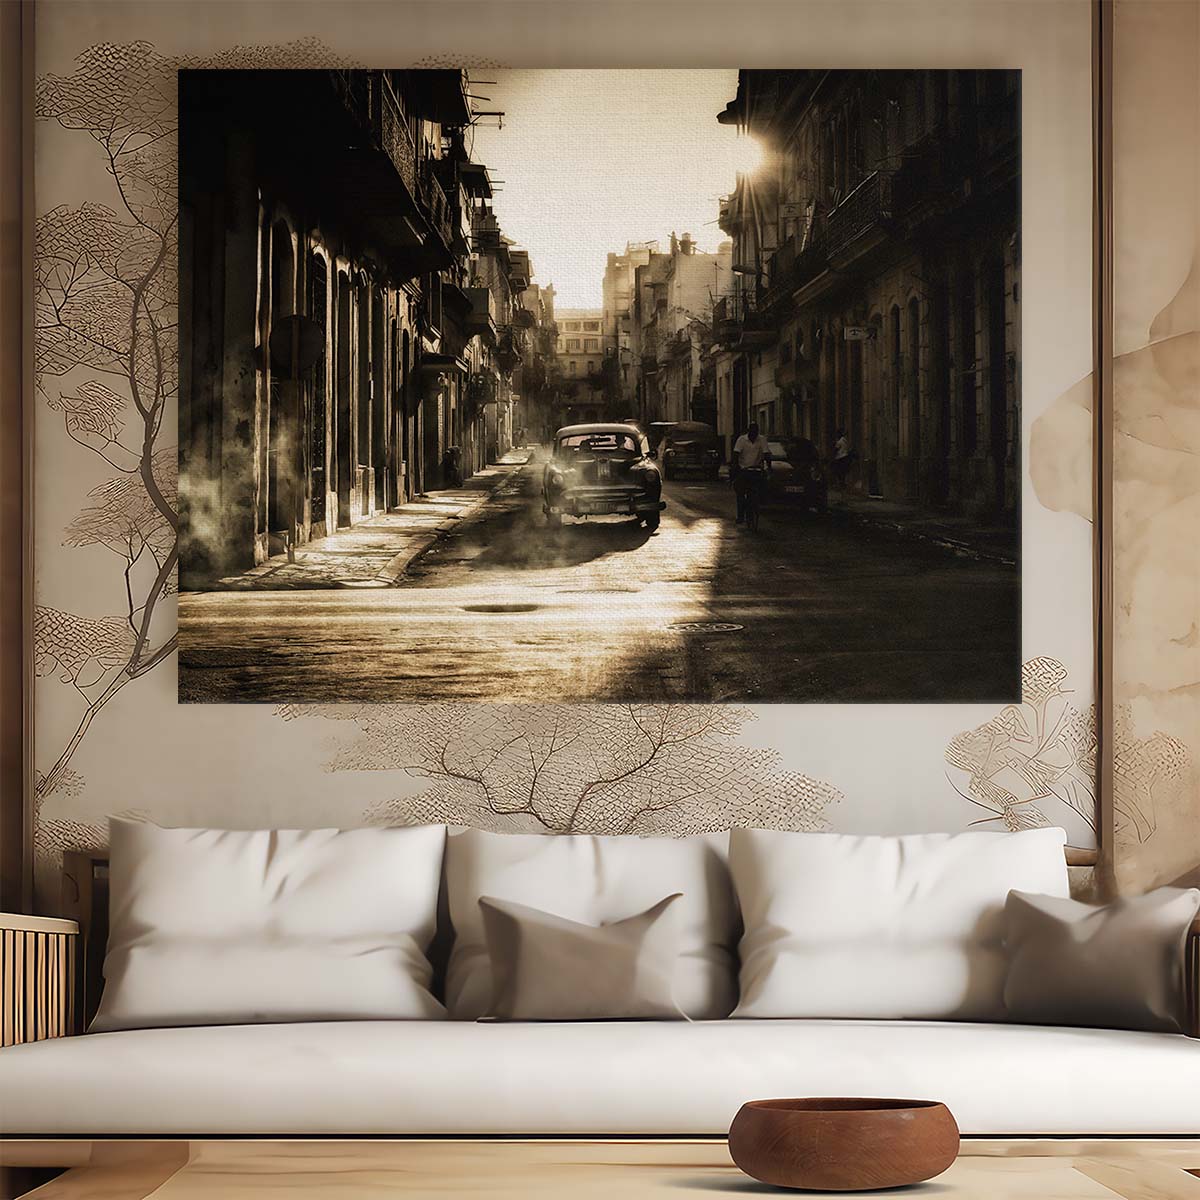 Sunrise Havana Vintage Cars & Bicycles Wall Art by Luxuriance Designs. Made in USA.